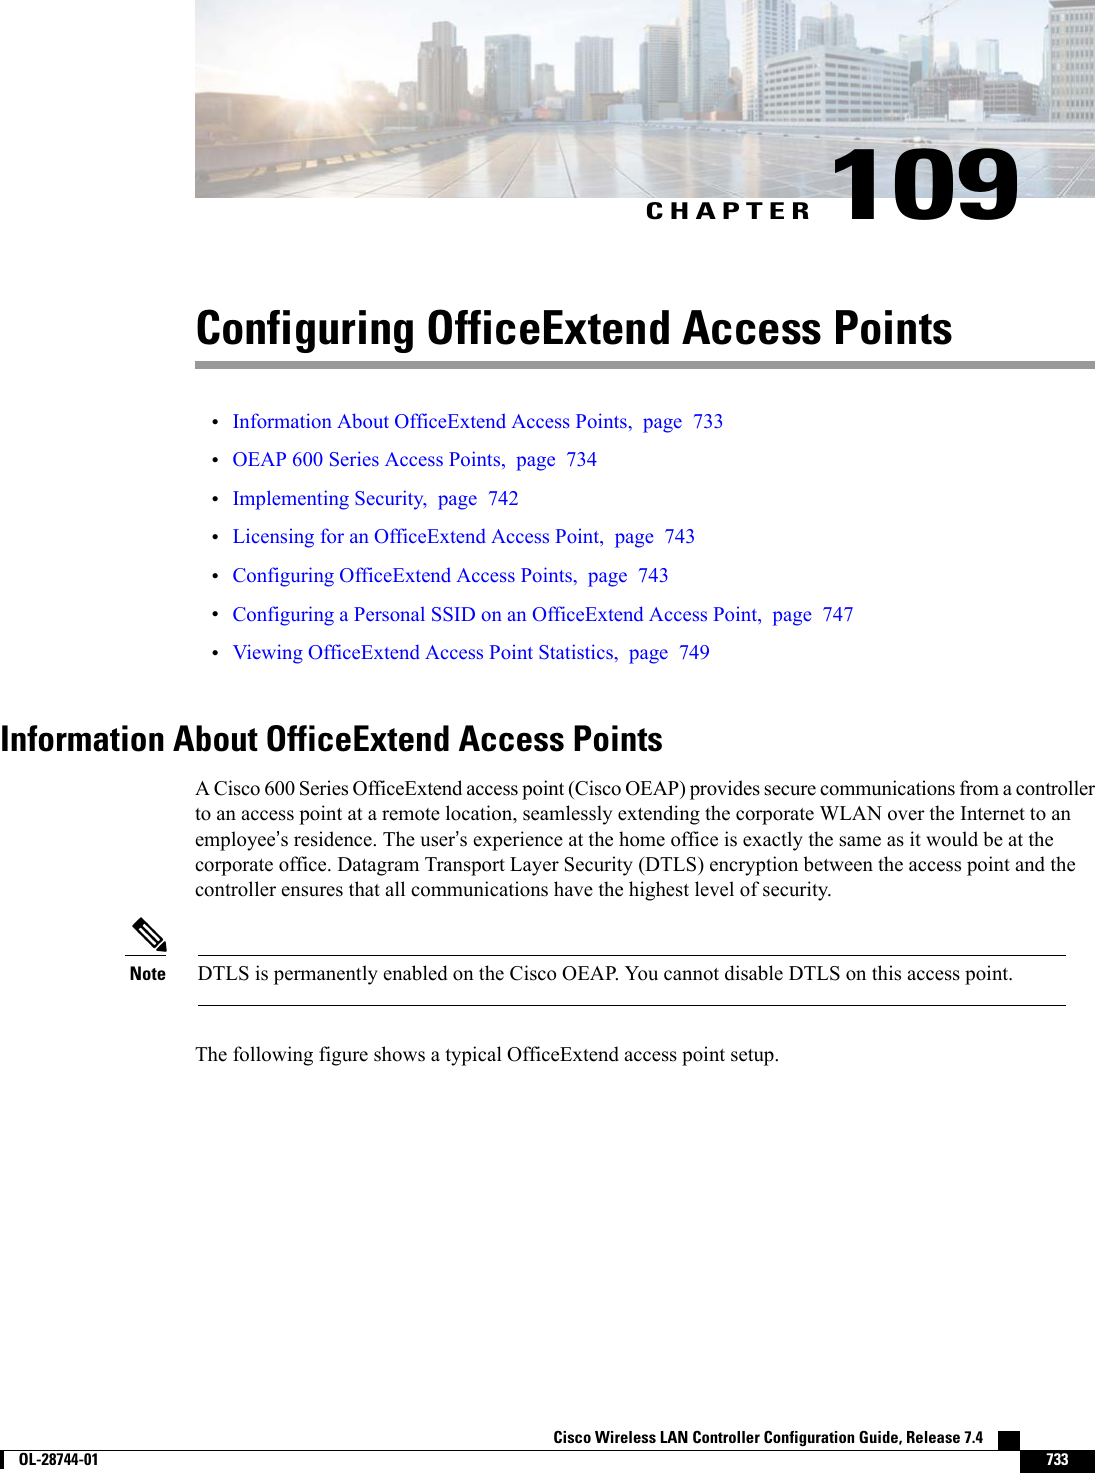 CHAPTER 109Configuring OfficeExtend Access Points•Information About OfficeExtend Access Points, page 733•OEAP 600 Series Access Points, page 734•Implementing Security, page 742•Licensing for an OfficeExtend Access Point, page 743•Configuring OfficeExtend Access Points, page 743•Configuring a Personal SSID on an OfficeExtend Access Point, page 747•Viewing OfficeExtend Access Point Statistics, page 749Information About OfficeExtend Access PointsA Cisco 600 Series OfficeExtend access point (Cisco OEAP) provides secure communications from a controllerto an access point at a remote location, seamlessly extending the corporate WLAN over the Internet to anemployee’s residence. The user’s experience at the home office is exactly the same as it would be at thecorporate office. Datagram Transport Layer Security (DTLS) encryption between the access point and thecontroller ensures that all communications have the highest level of security.DTLS is permanently enabled on the Cisco OEAP. You cannot disable DTLS on this access point.NoteThe following figure shows a typical OfficeExtend access point setup.Cisco Wireless LAN Controller Configuration Guide, Release 7.4        OL-28744-01 733